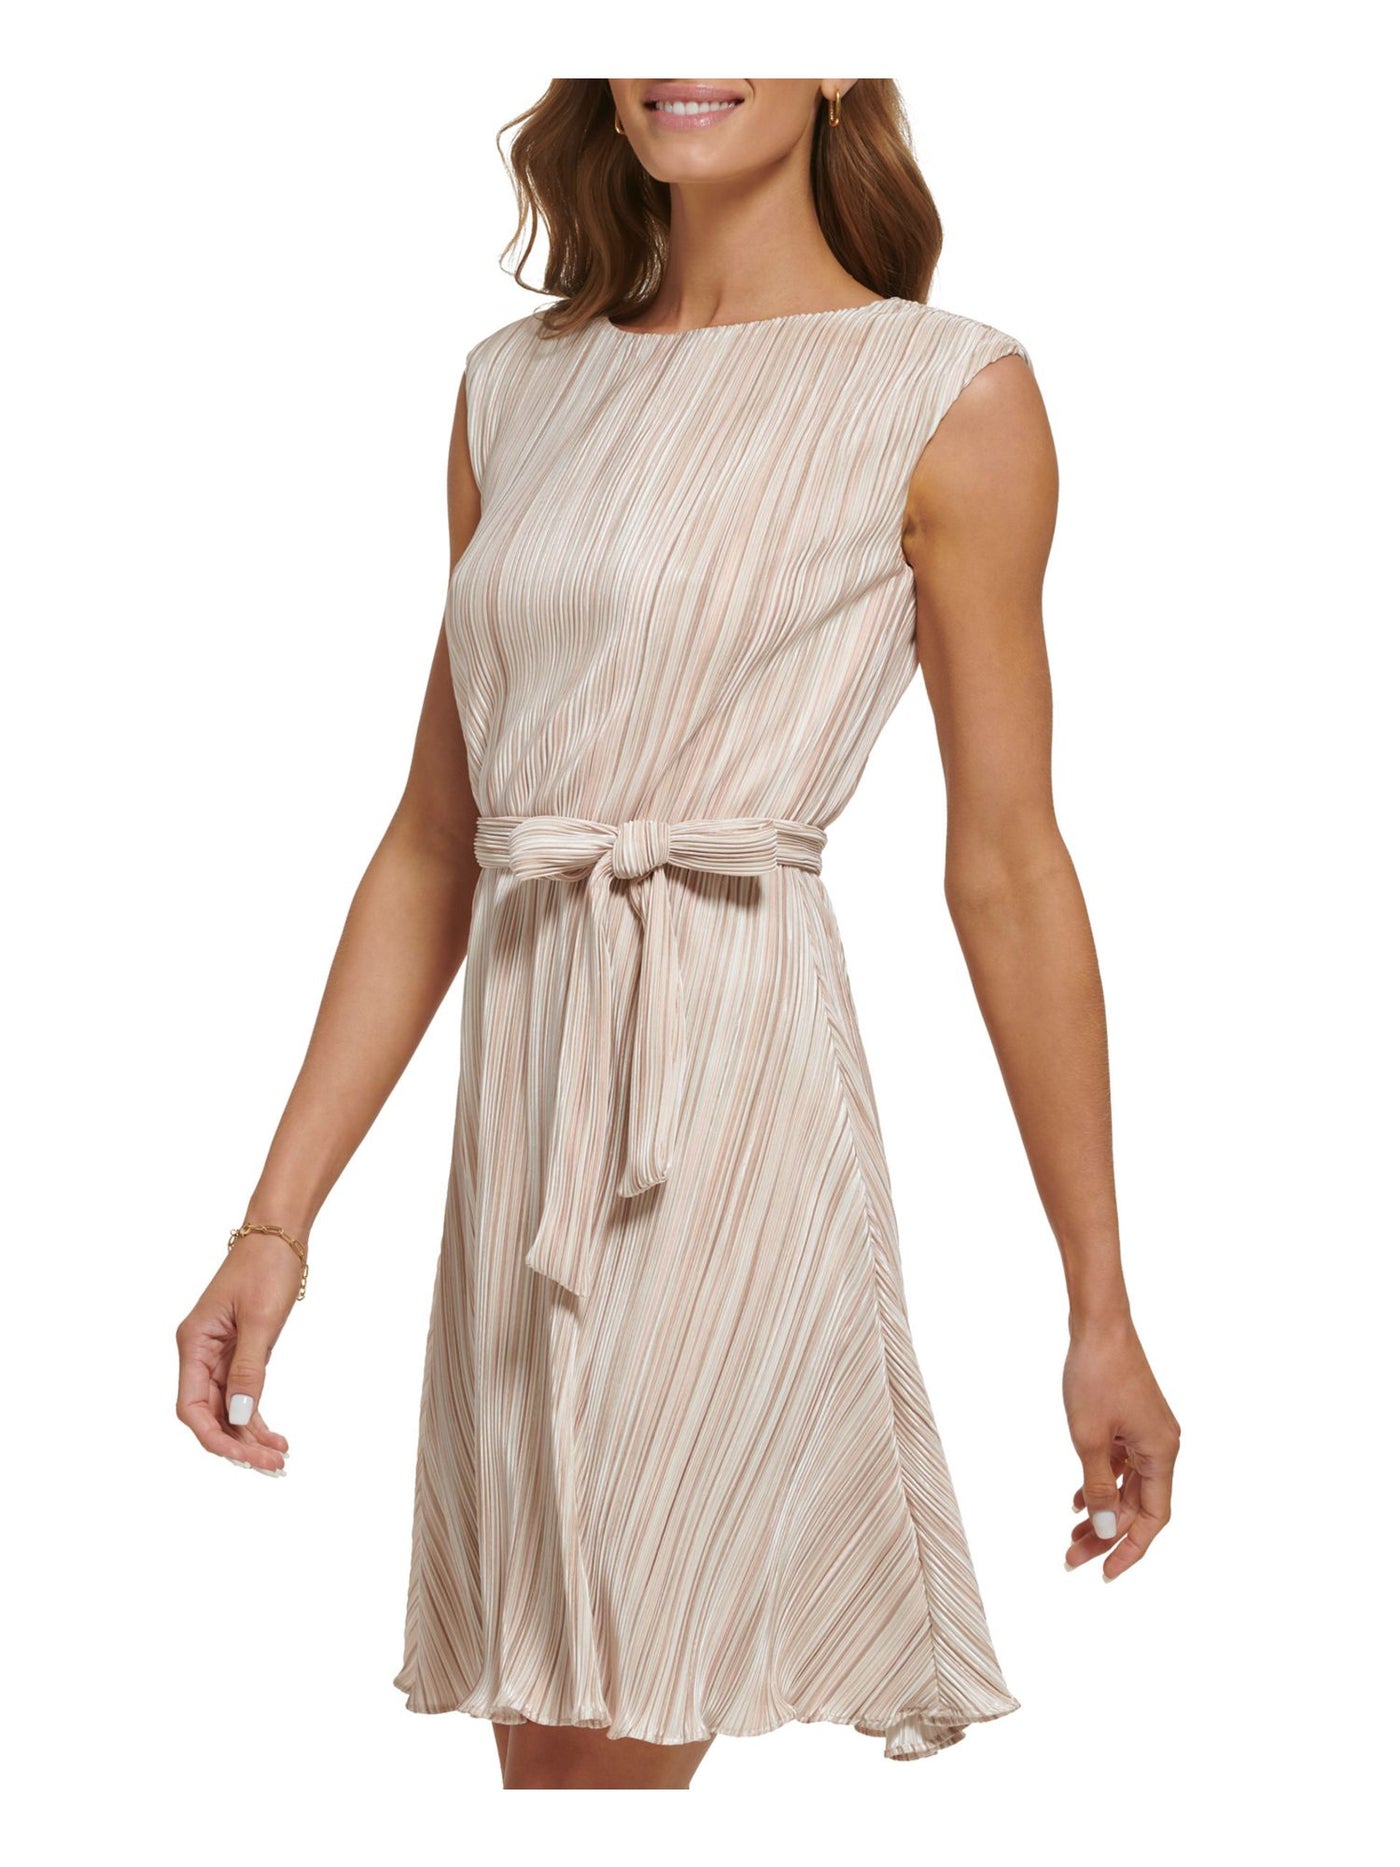 DKNY Womens Beige Ruffled Lined Bodice Tie Belt Pullover Pinstripe Sleeveless Round Neck Above The Knee Fit + Flare Dress 16